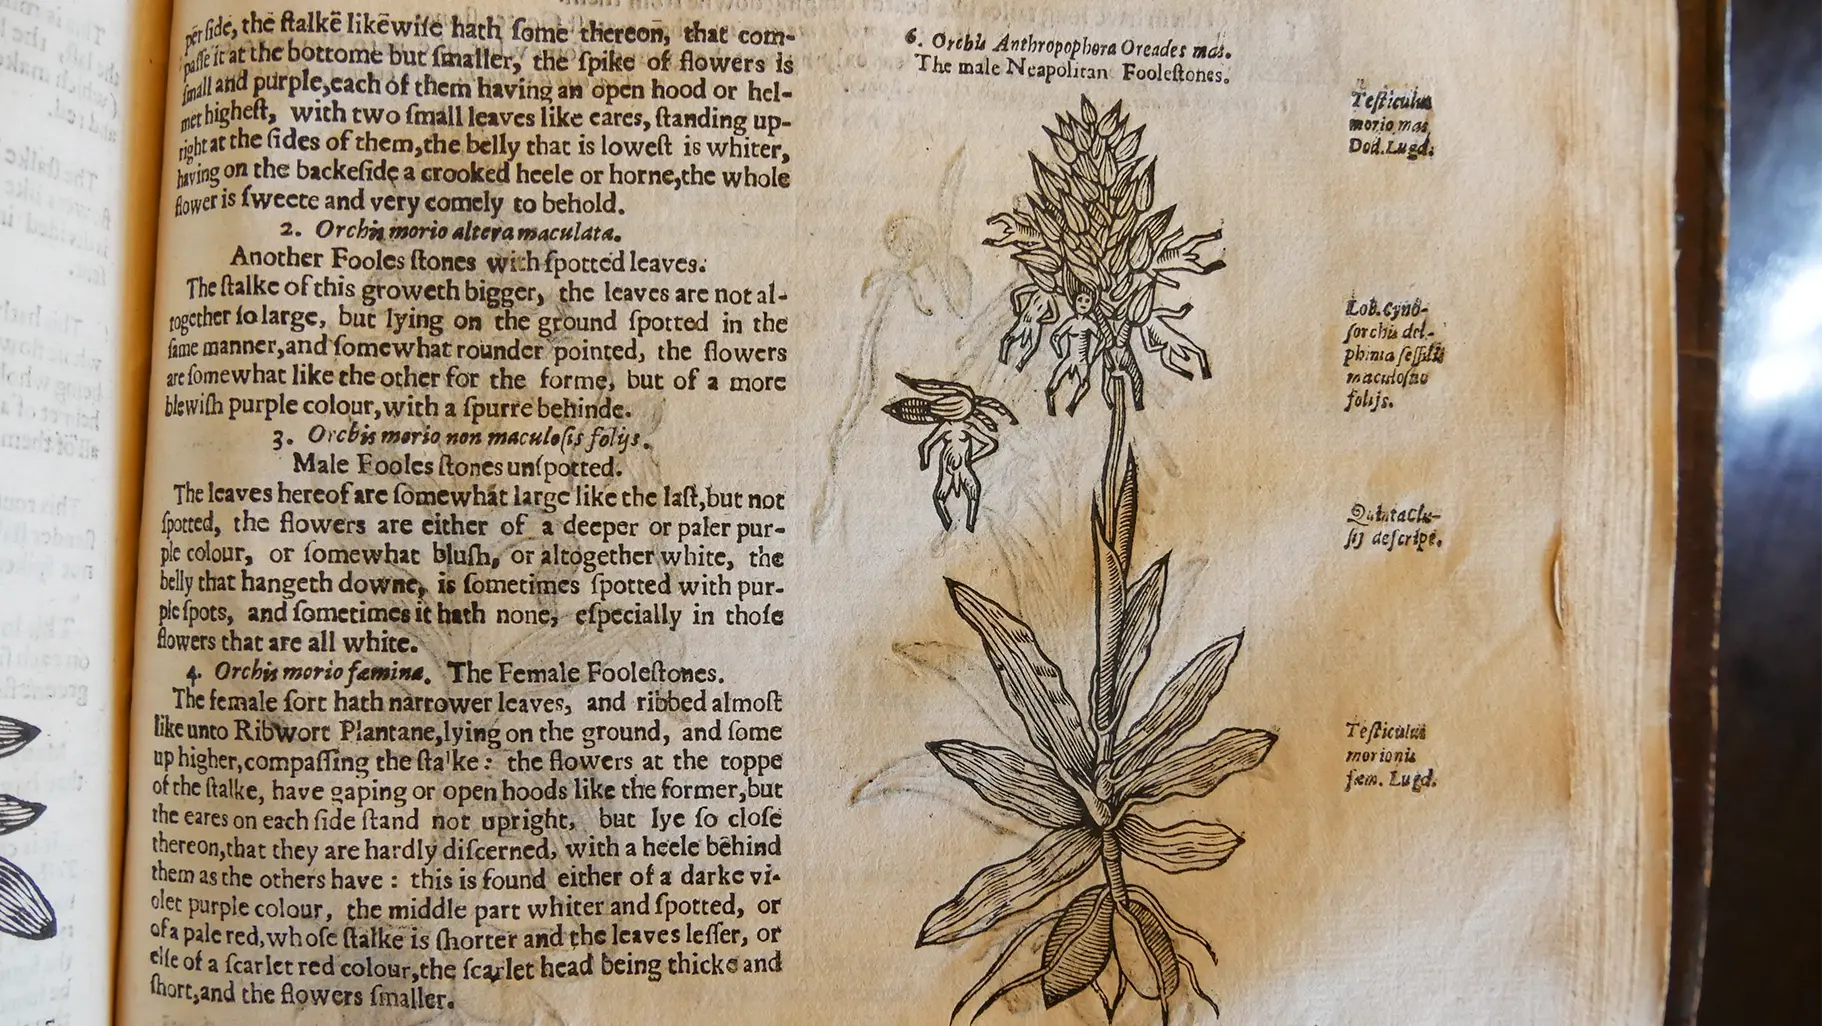 There have been some very funny, beautiful, even strange pictures of plants throughout history. Find some of our favorites in this gallery, starting with an odd and inexplicable image from John Parkinson’s Theatrum Botanicum.